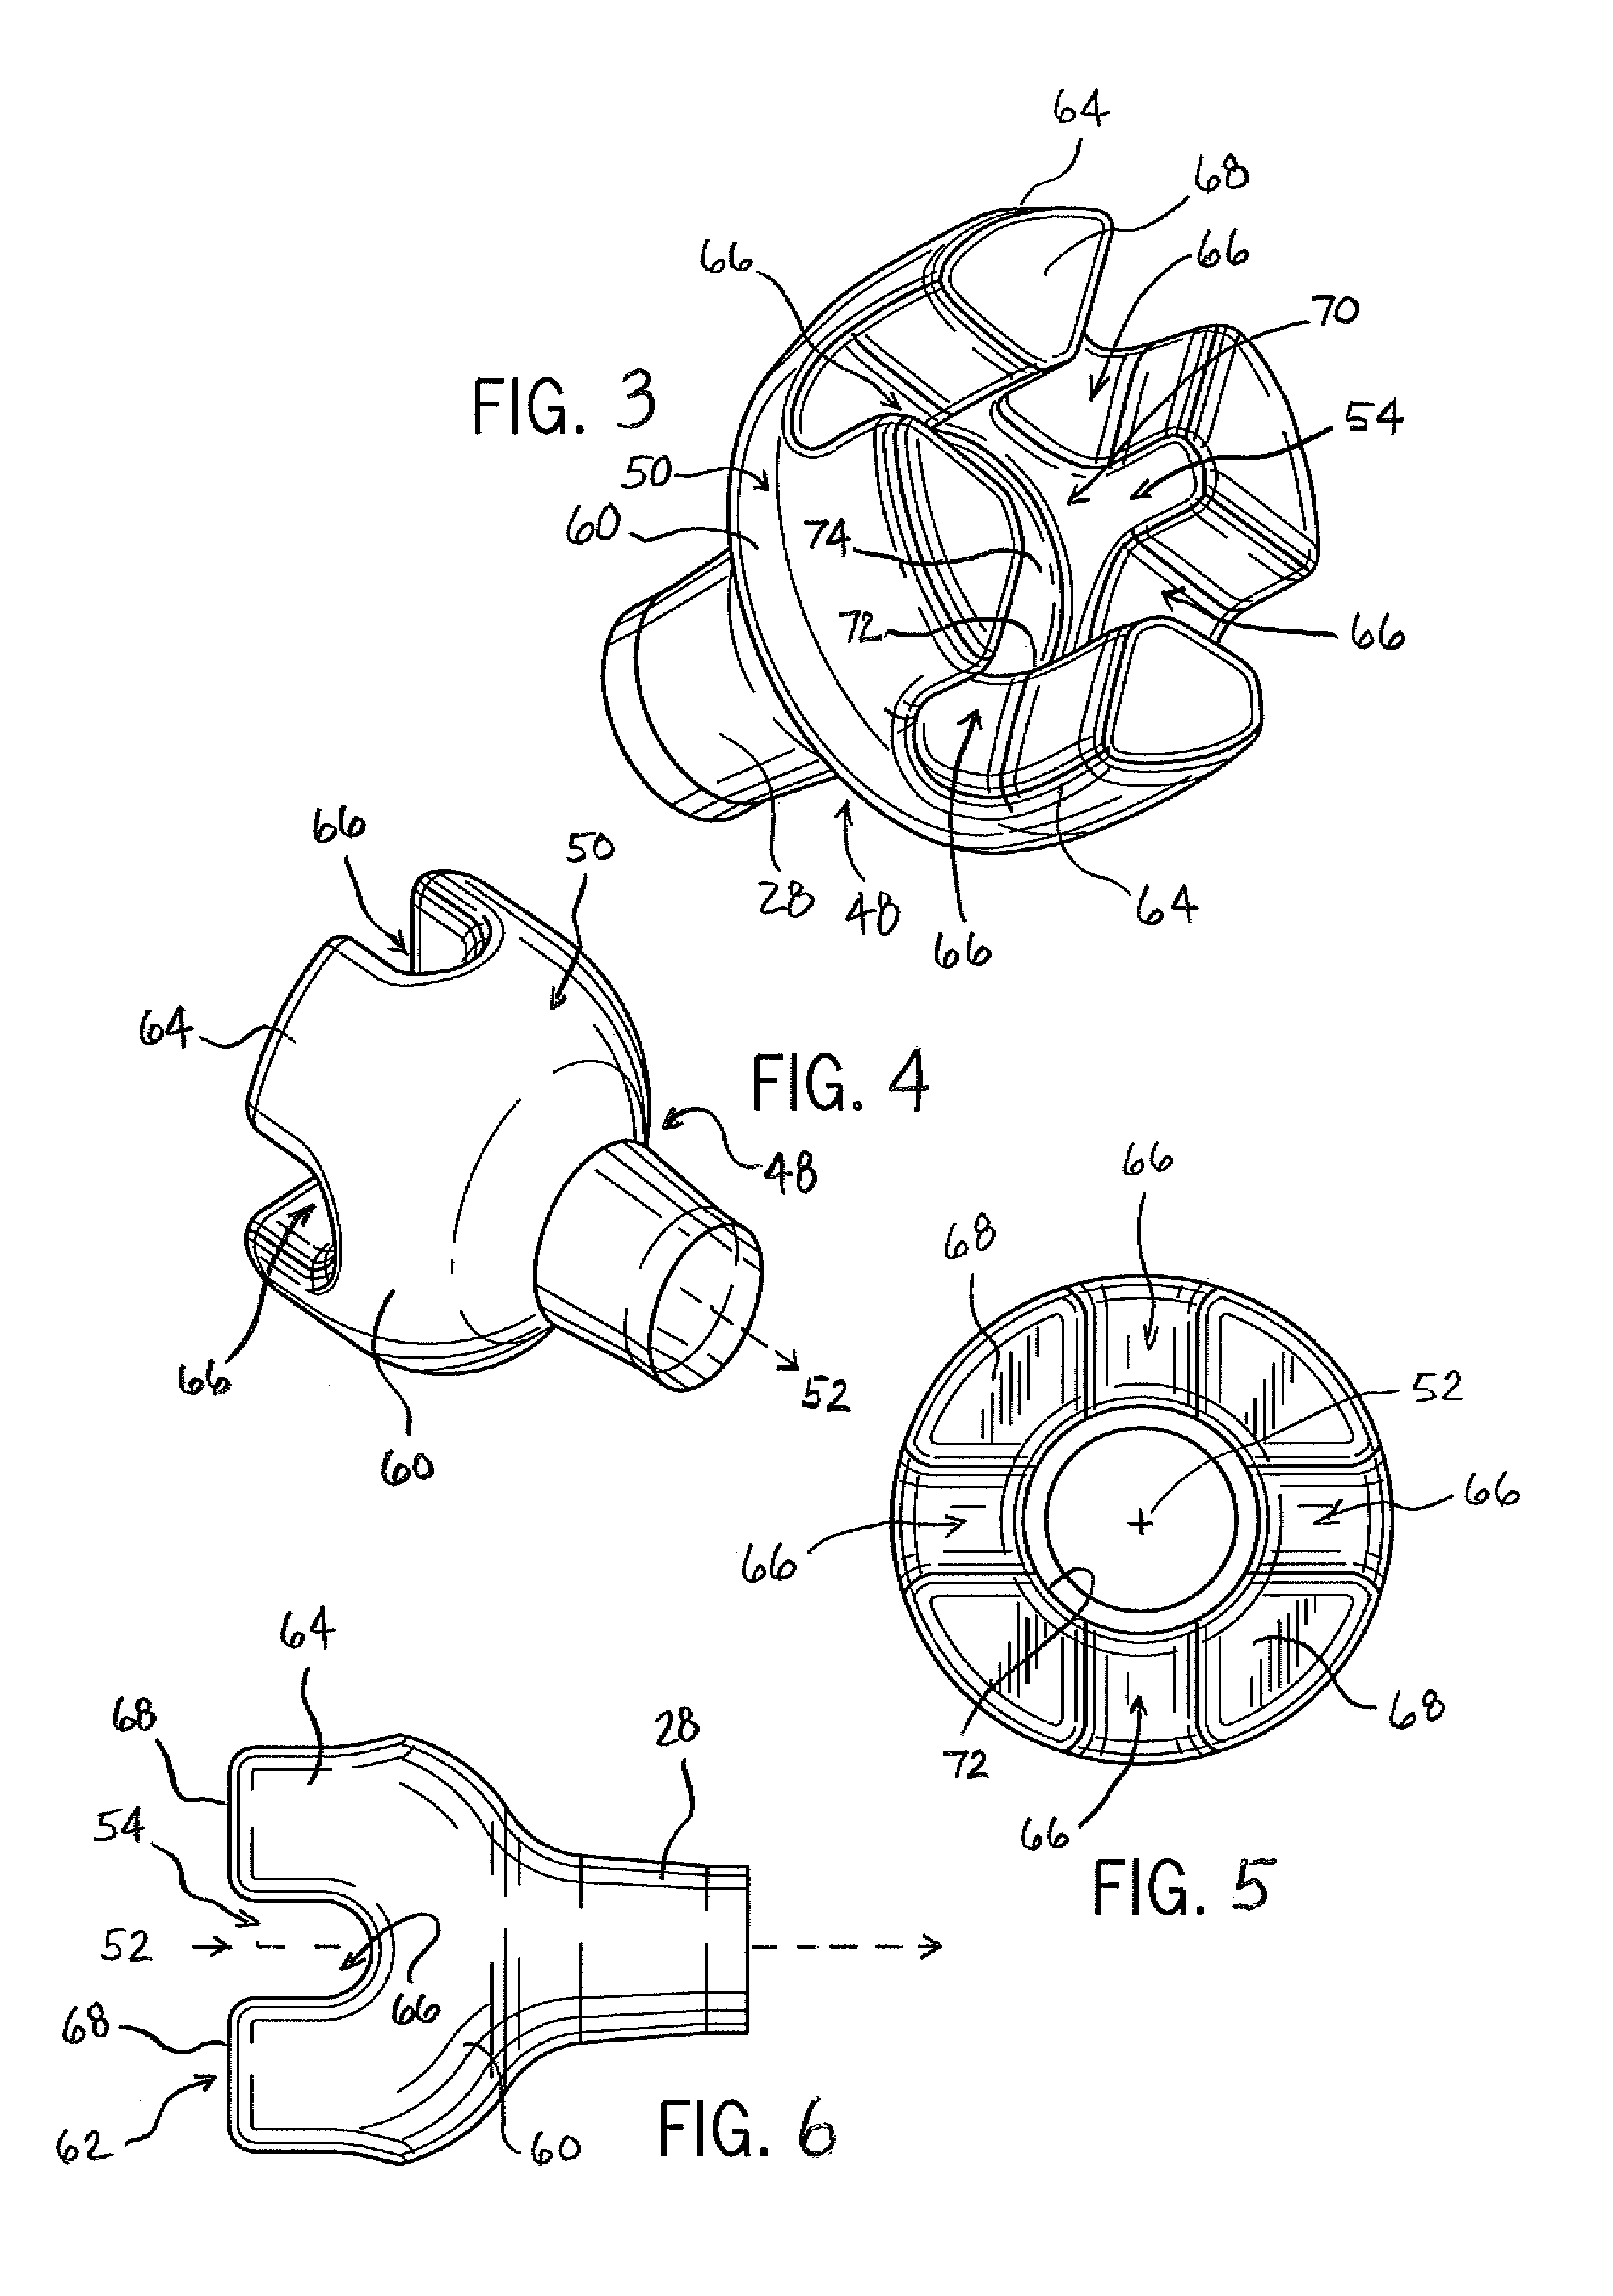 Retention Cuff for Bowel Management System